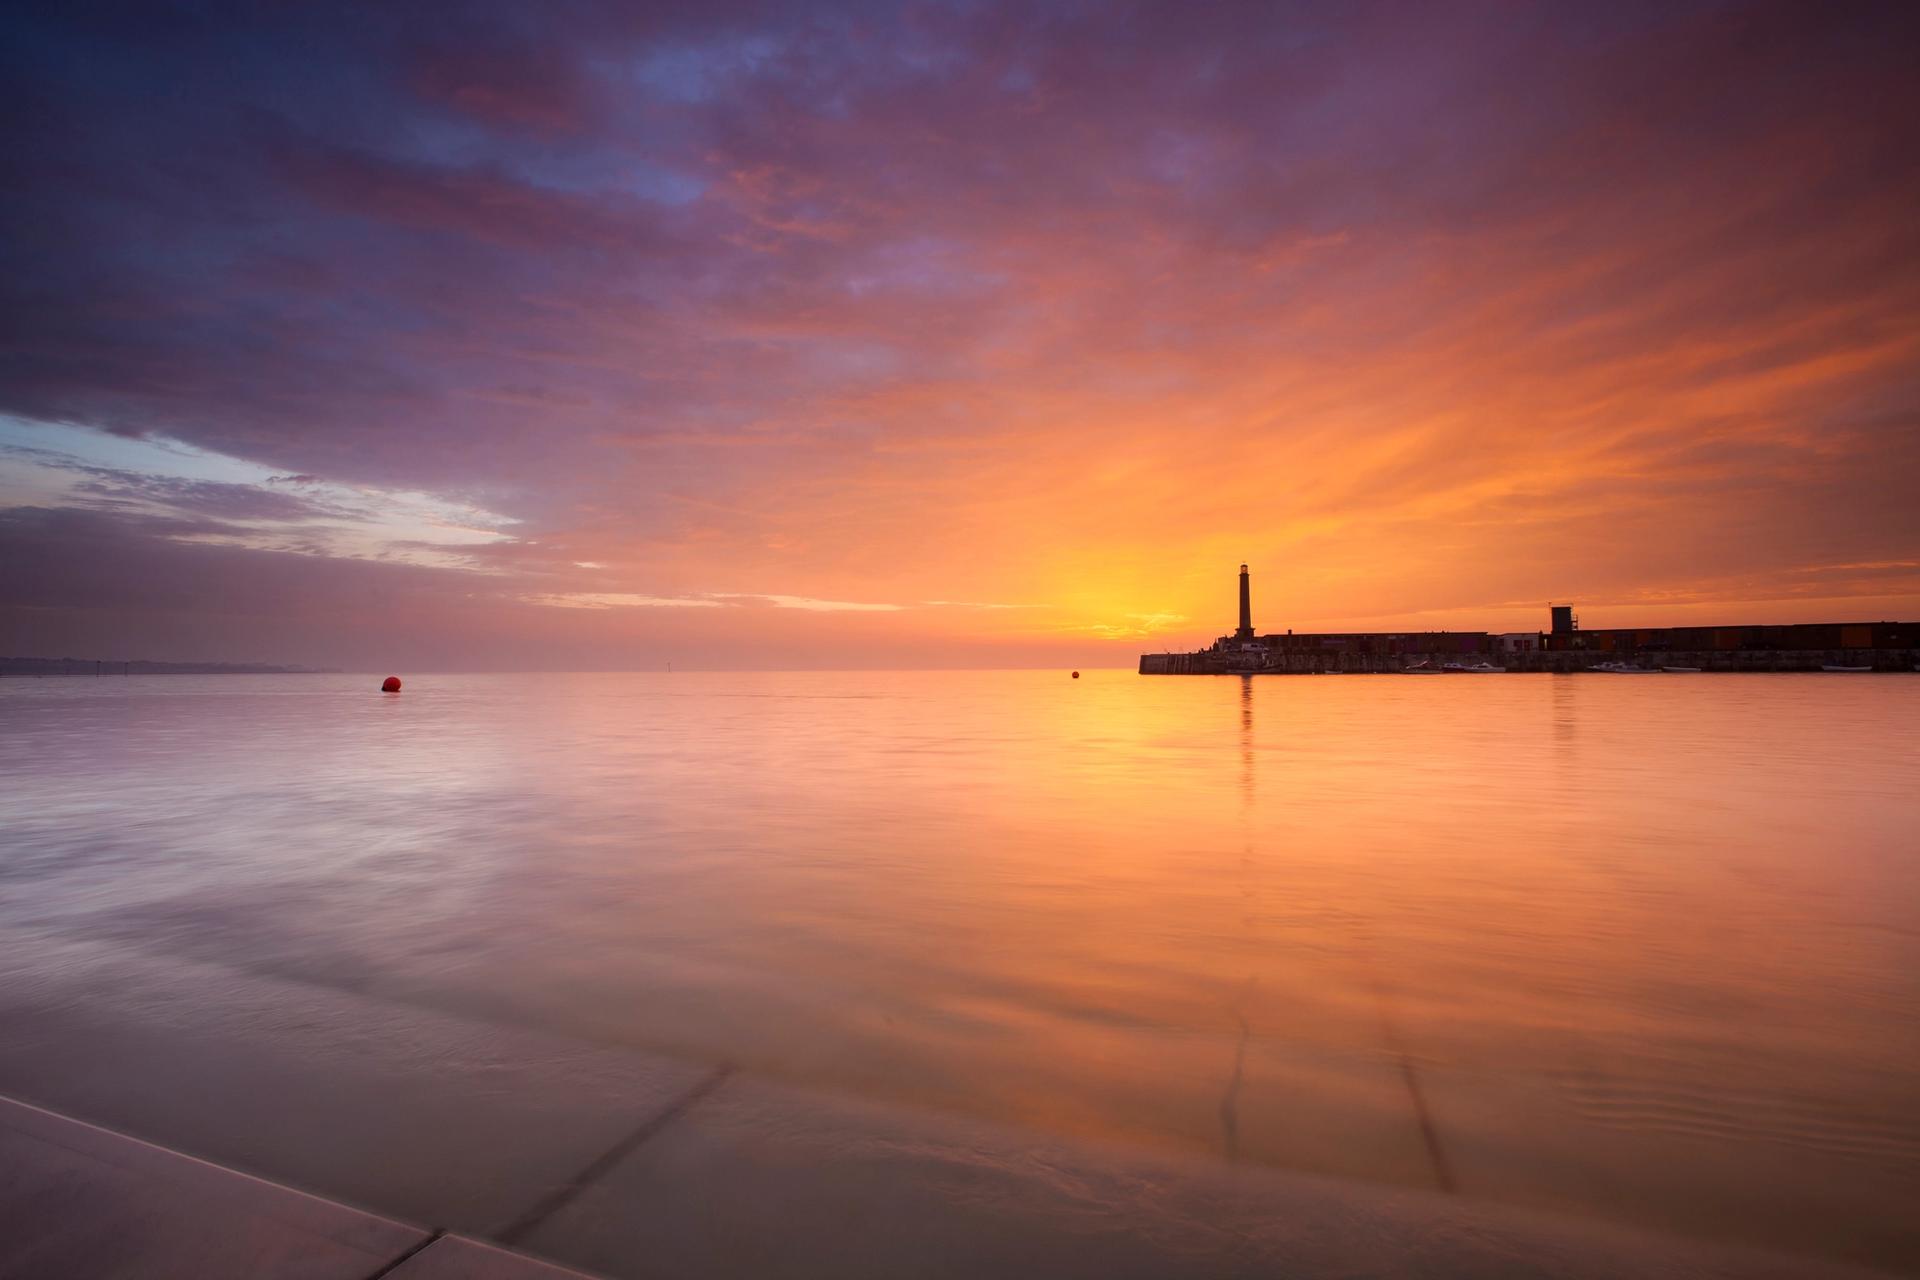 The sculpture will be located on Margate's seafront Photo: Visit Thanet